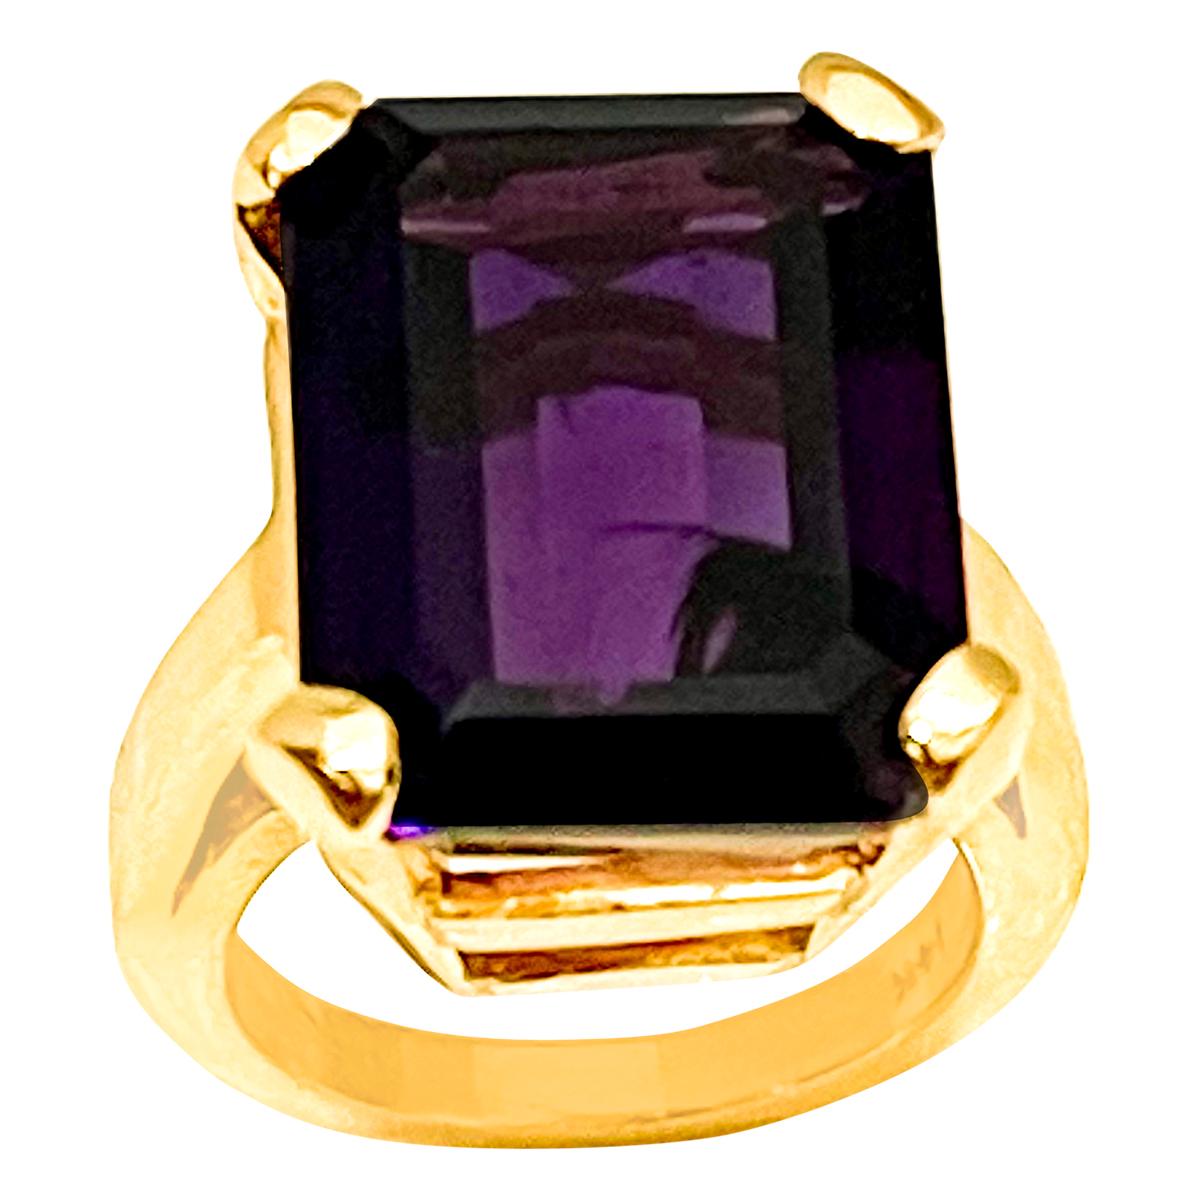 15 Carat Emerald Cut Amethyst Cocktail Ring in 14 Karat Yellow Gold For Sale